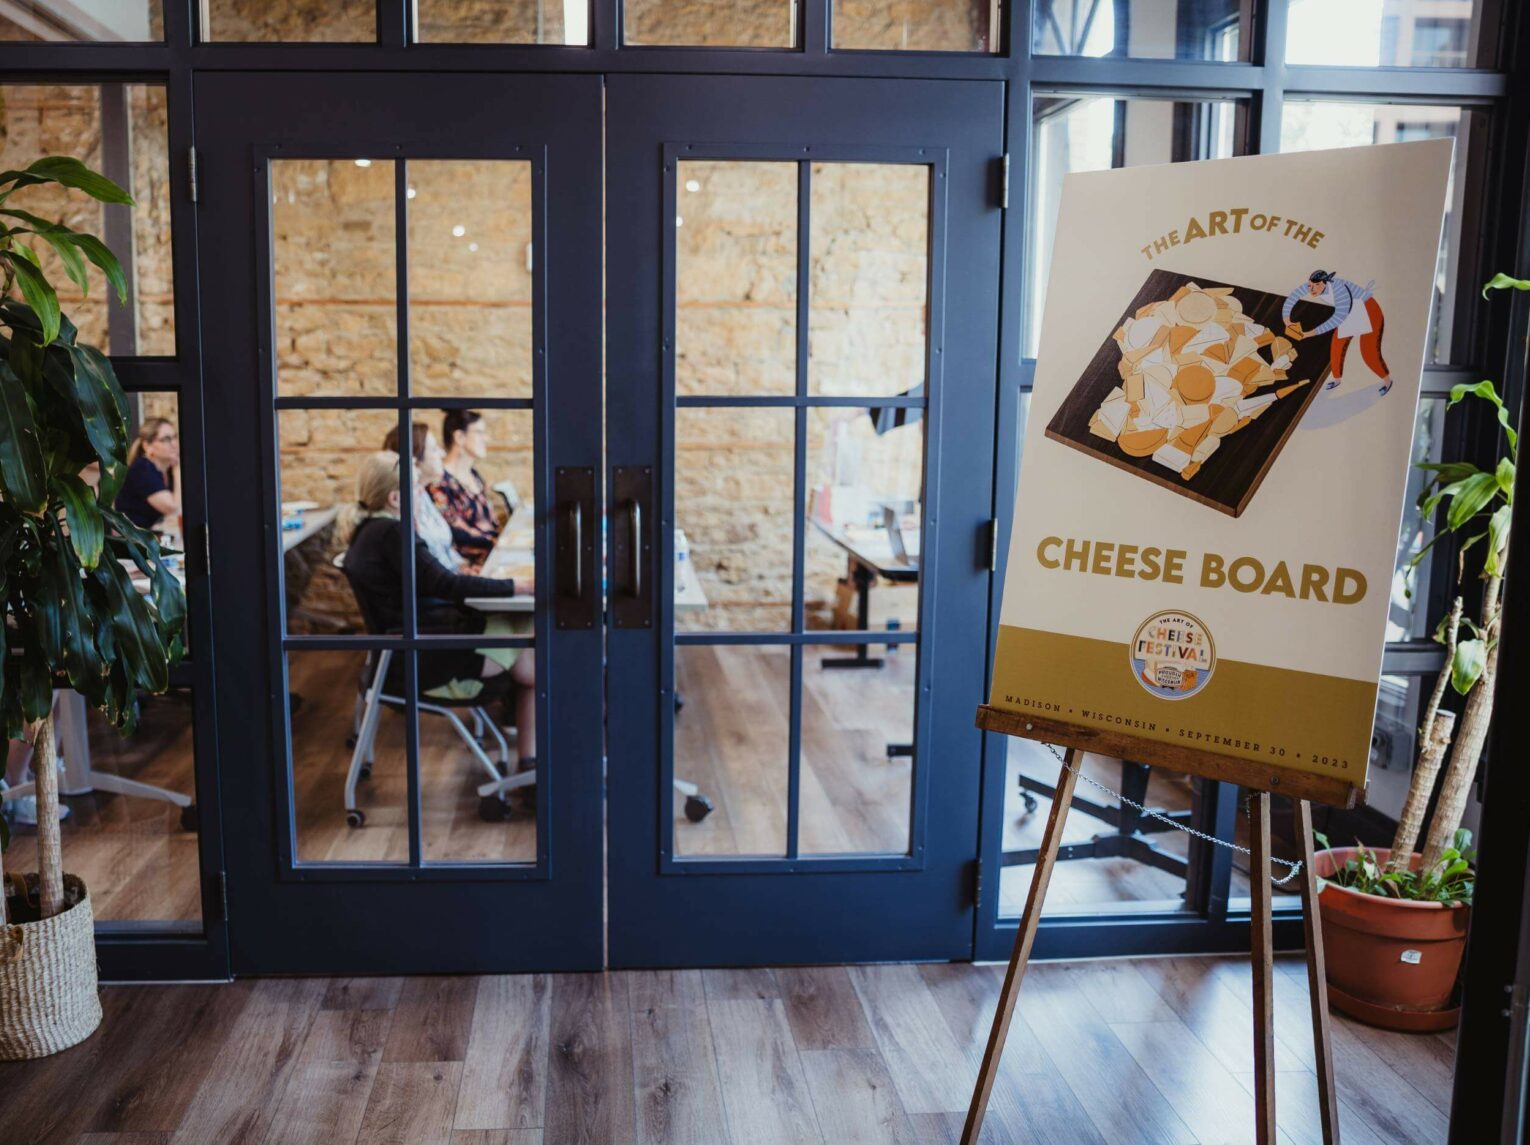 Entrance to the Art of the Cheese Board class